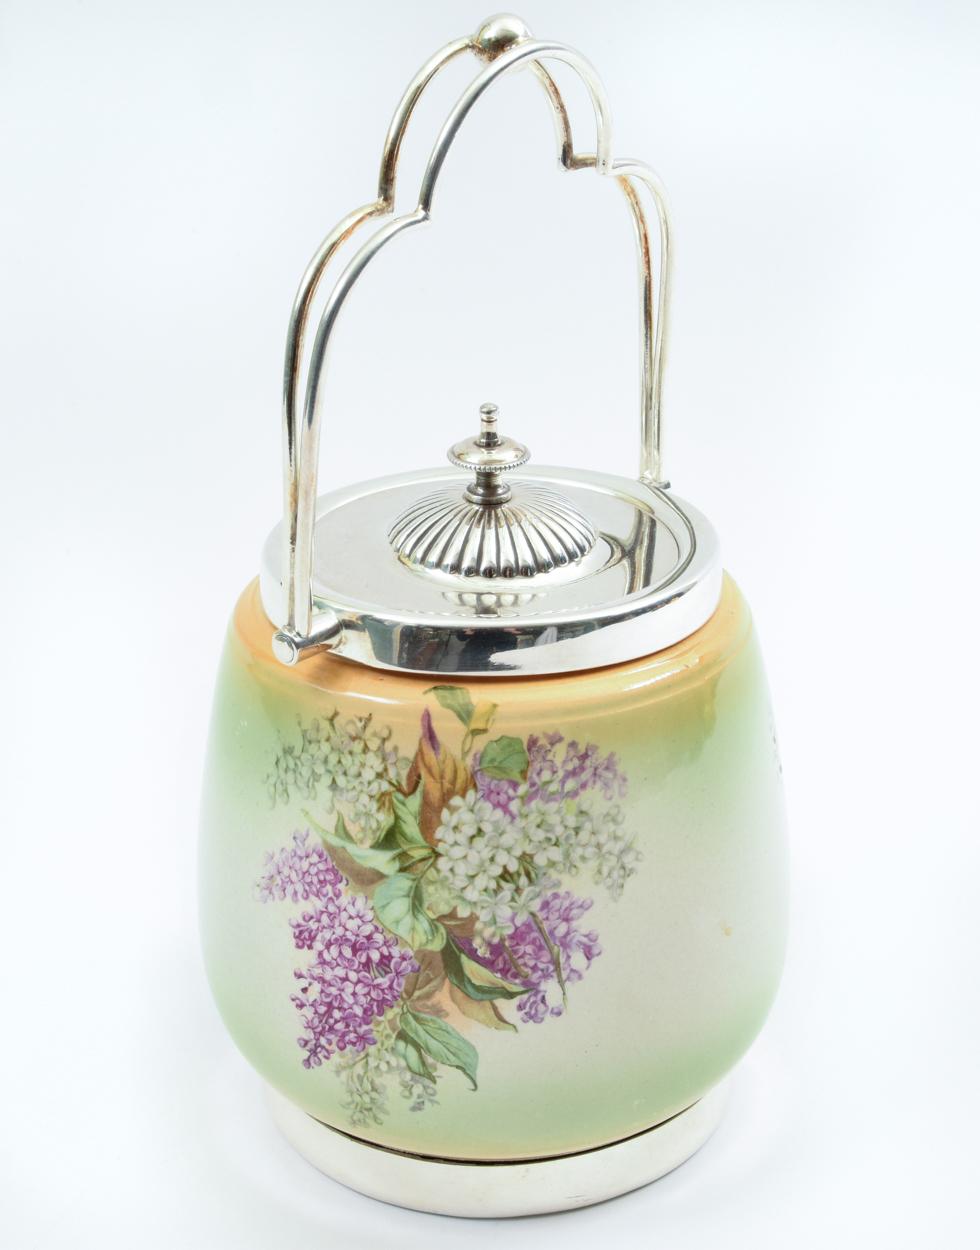 Antique English porcelain with silver plate covered ice with exterior floral design details. The ice bucket is in excellent antique condition. The ice bucket measure about 10 inches to the handle x 6 inches body diameter.